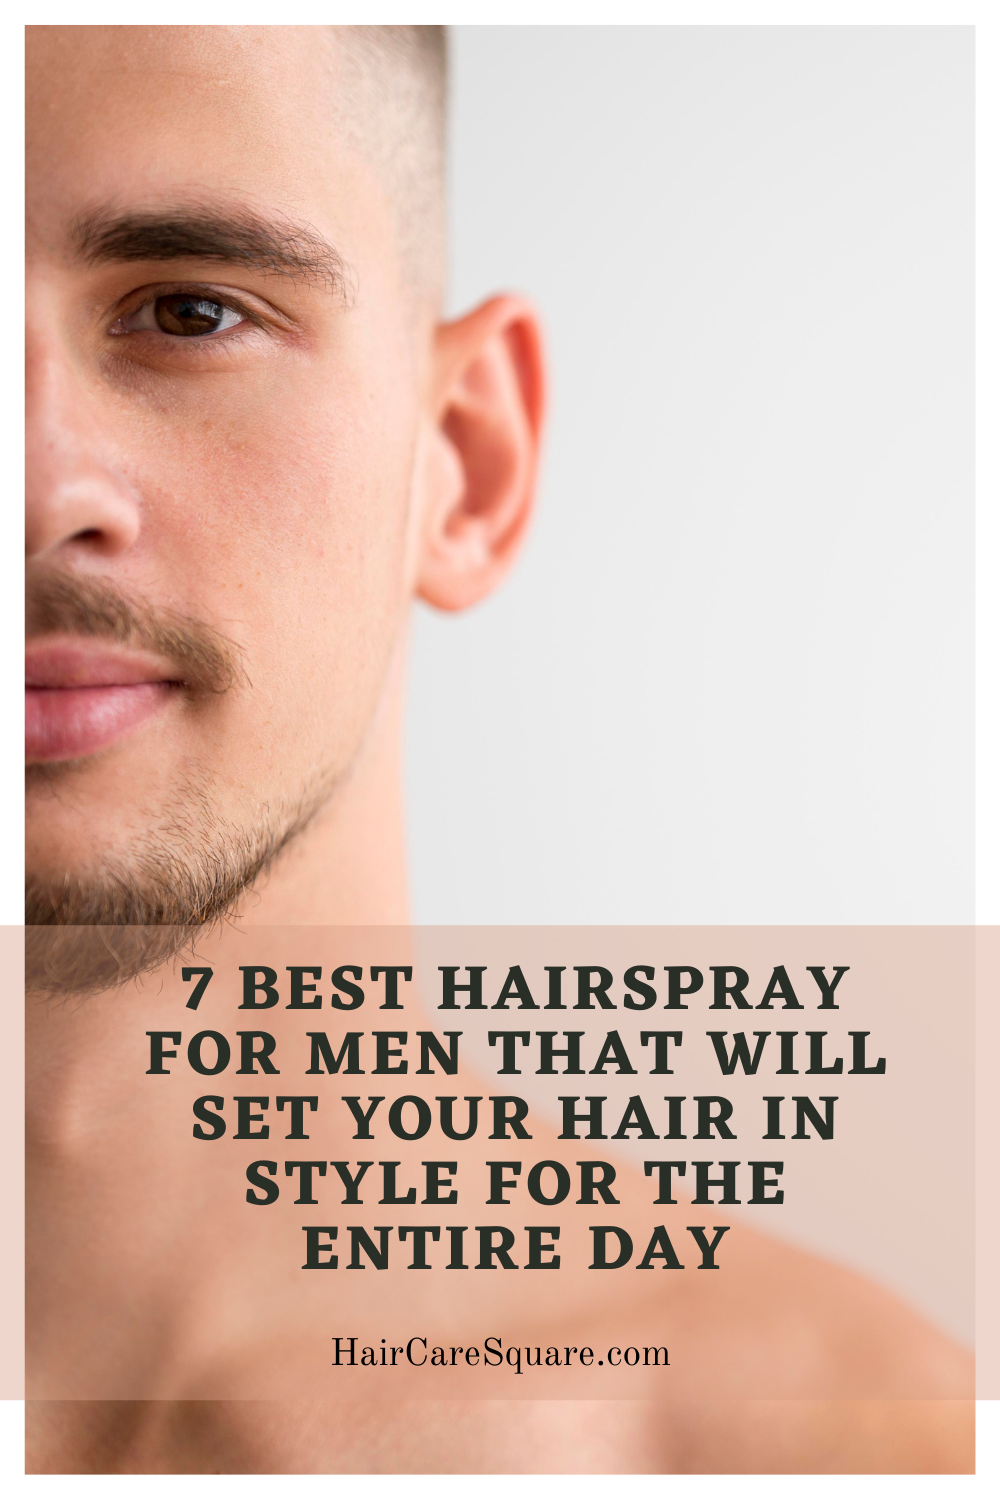 7 Best Hairspray For Men That Will Set Your Hair In Style For The Entire Day